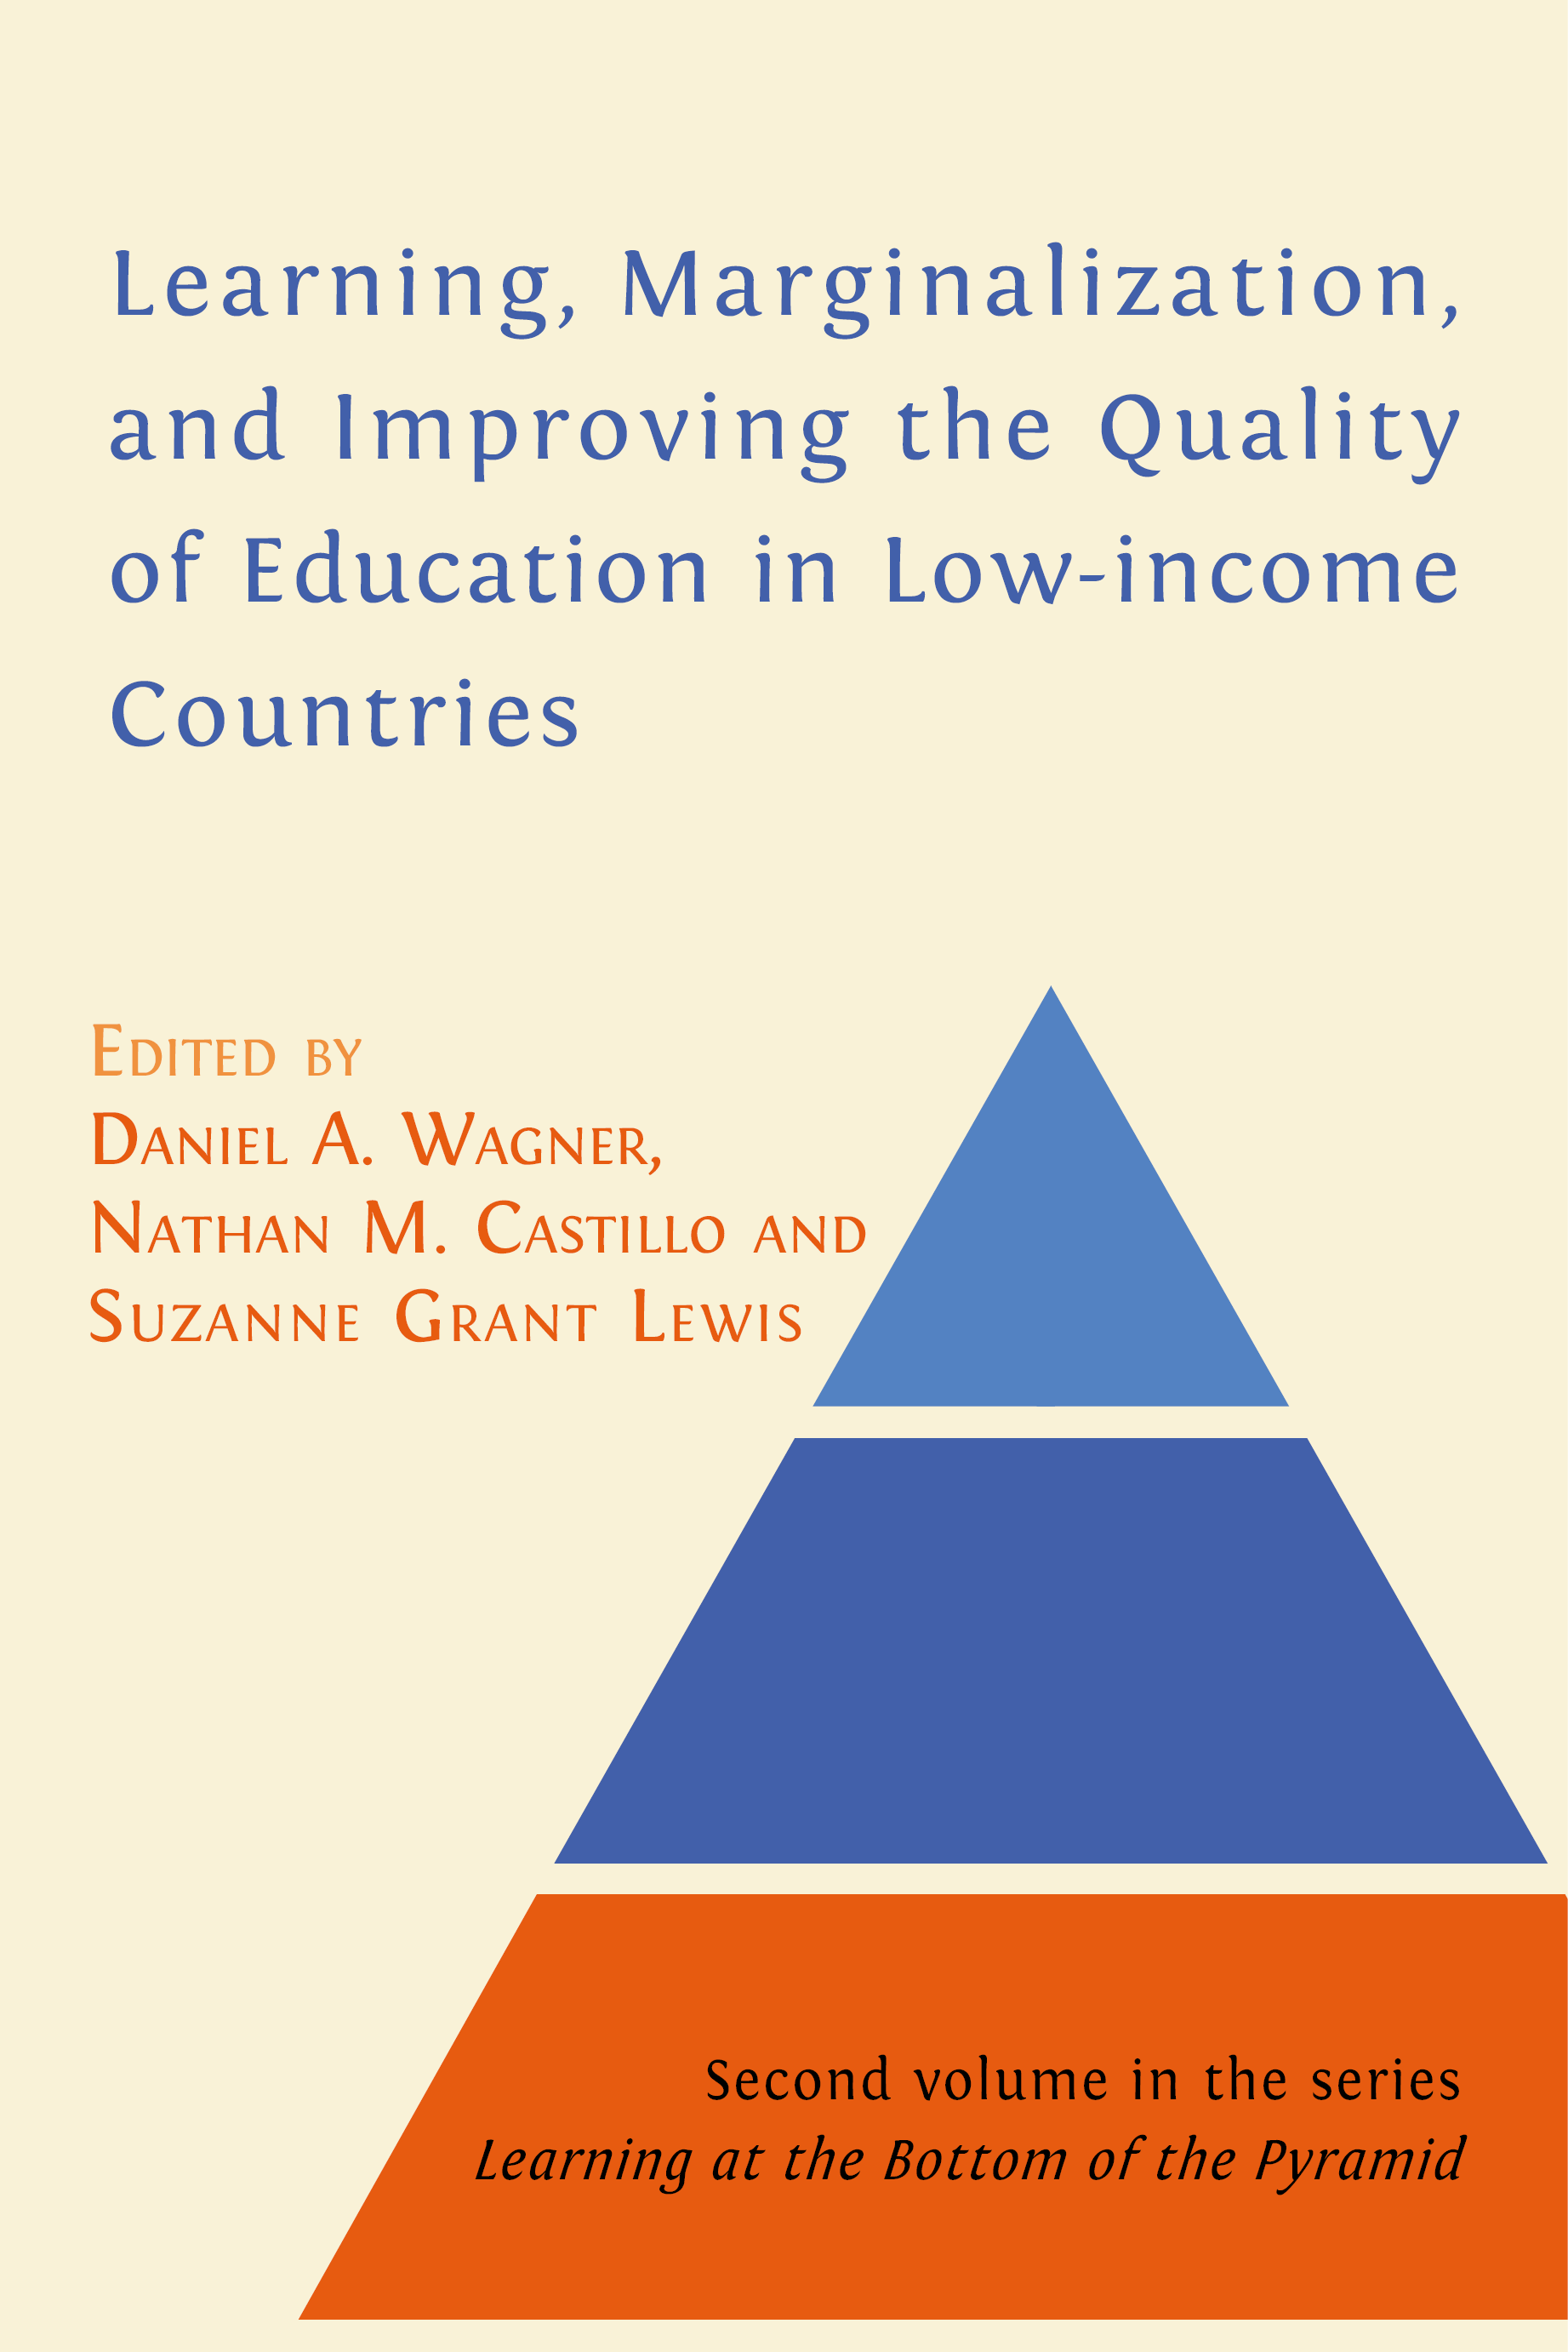 Learning, Marginalization, and Improving the Quality of Education in Low-income Countries book cover image